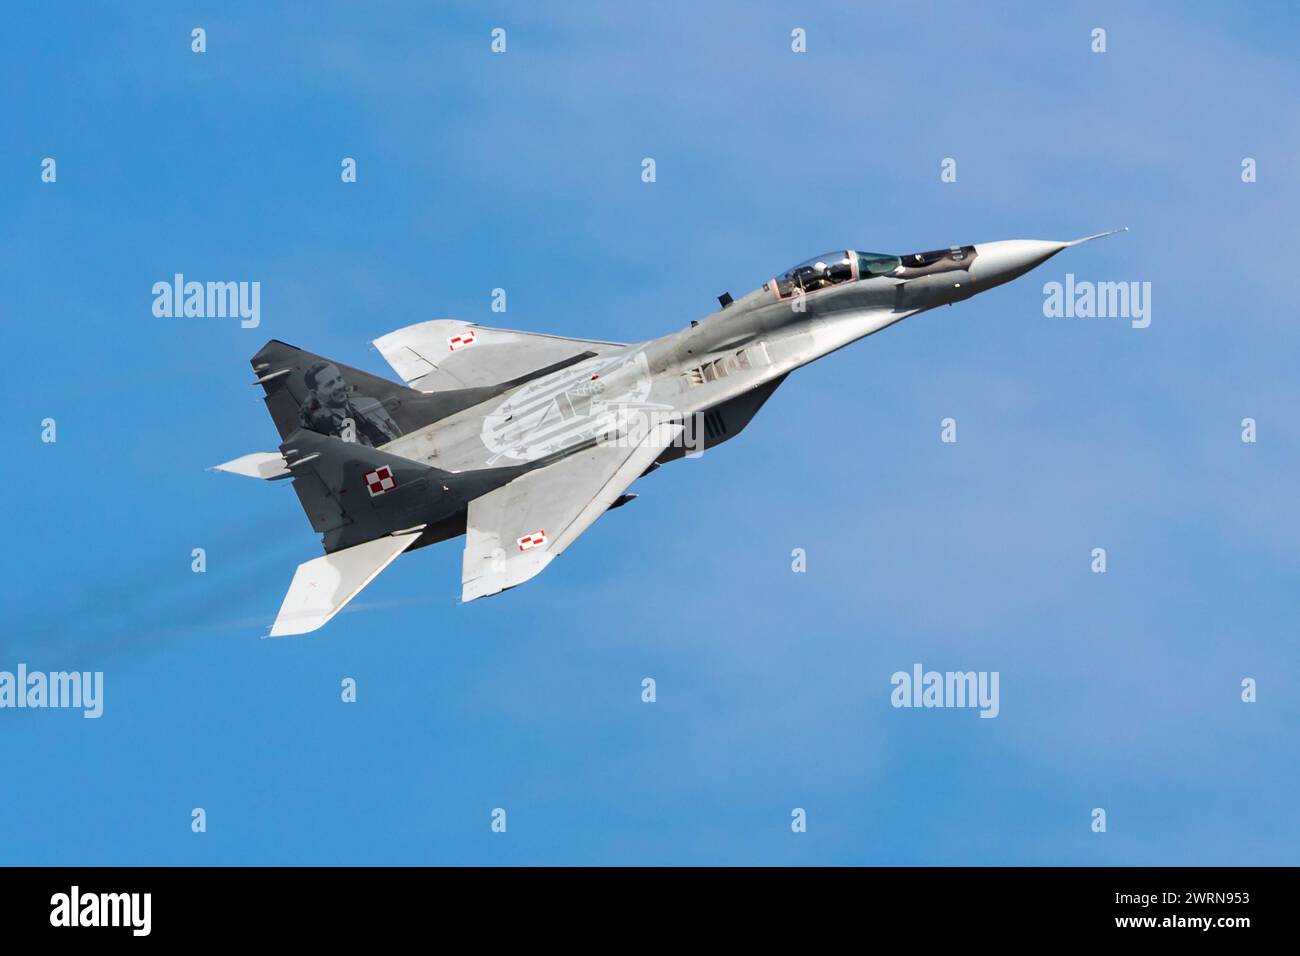 Radom, Poland - August 26, 2023: Polish Air Force Lockheed Sukhoi Su-22 Fitter fighter jet plane flying. Aviation and military aircraft. Stock Photo